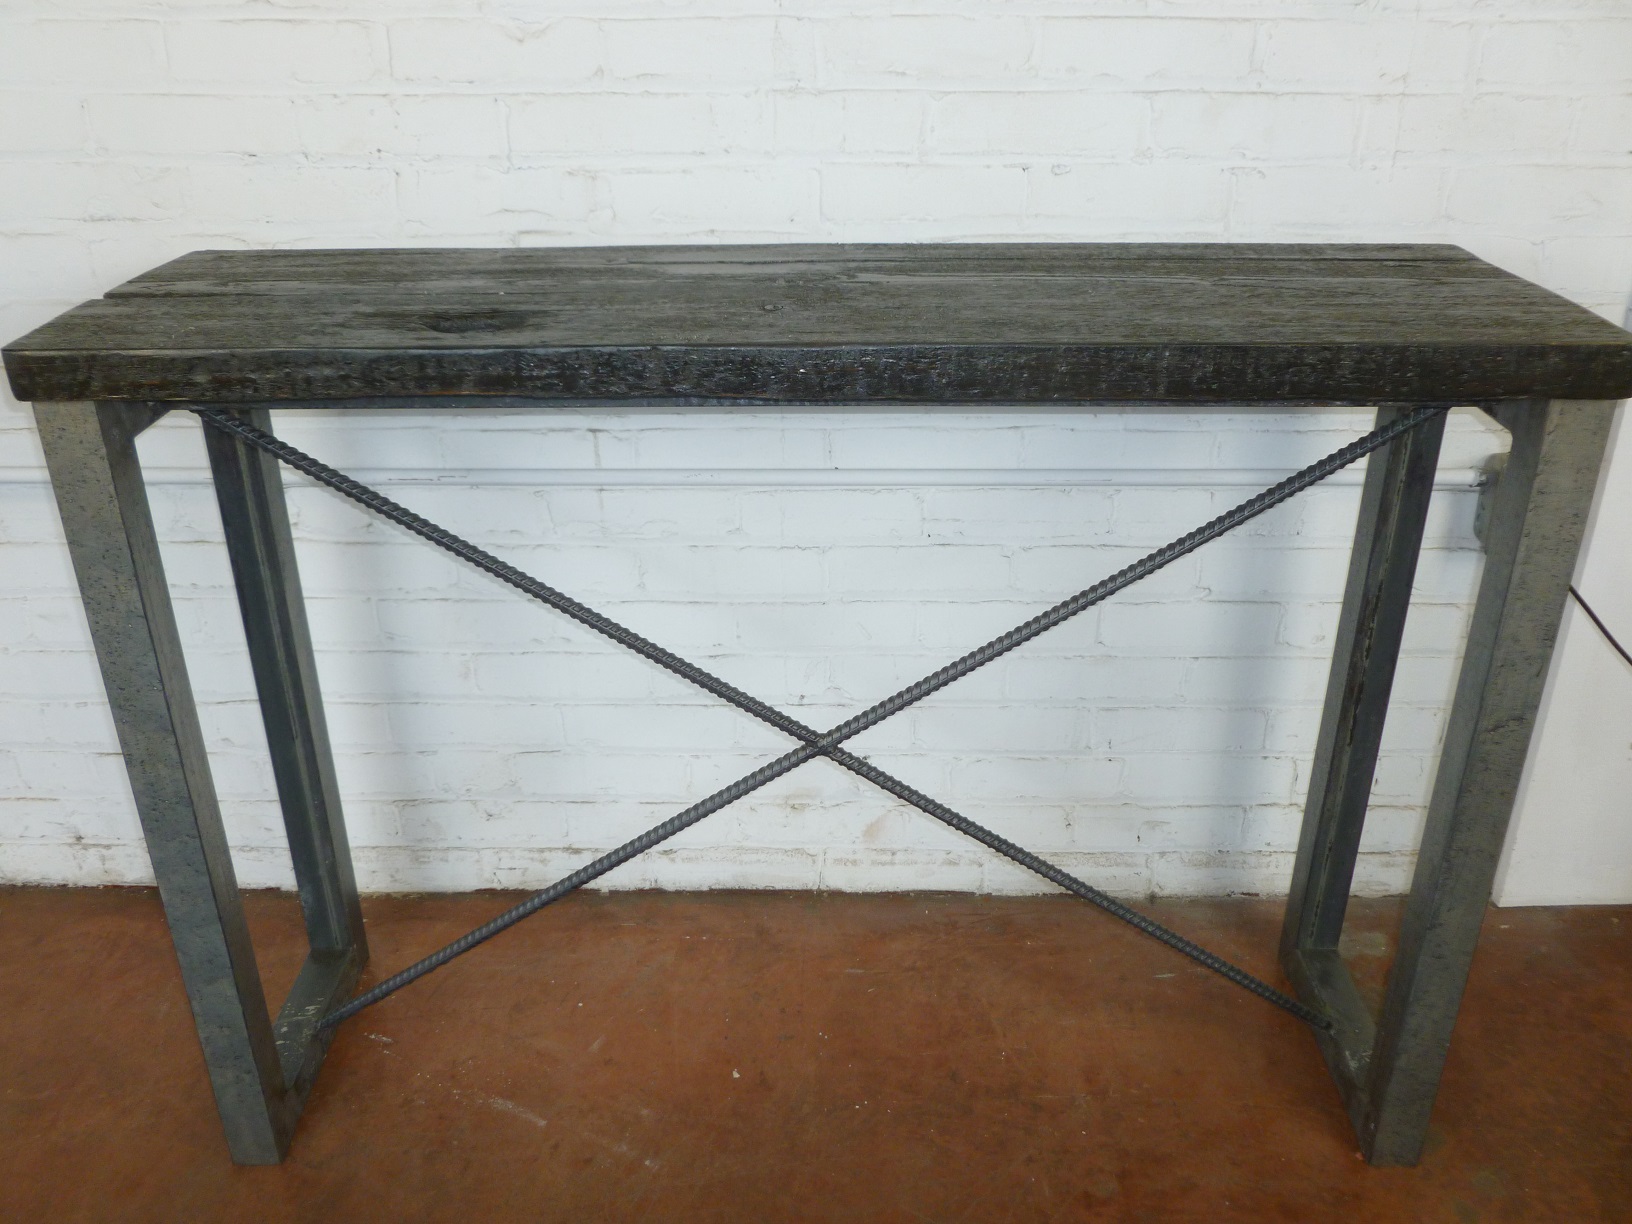 Custom iron console table by Ferro Designs LLC with a barn wood top and a steel finish base.